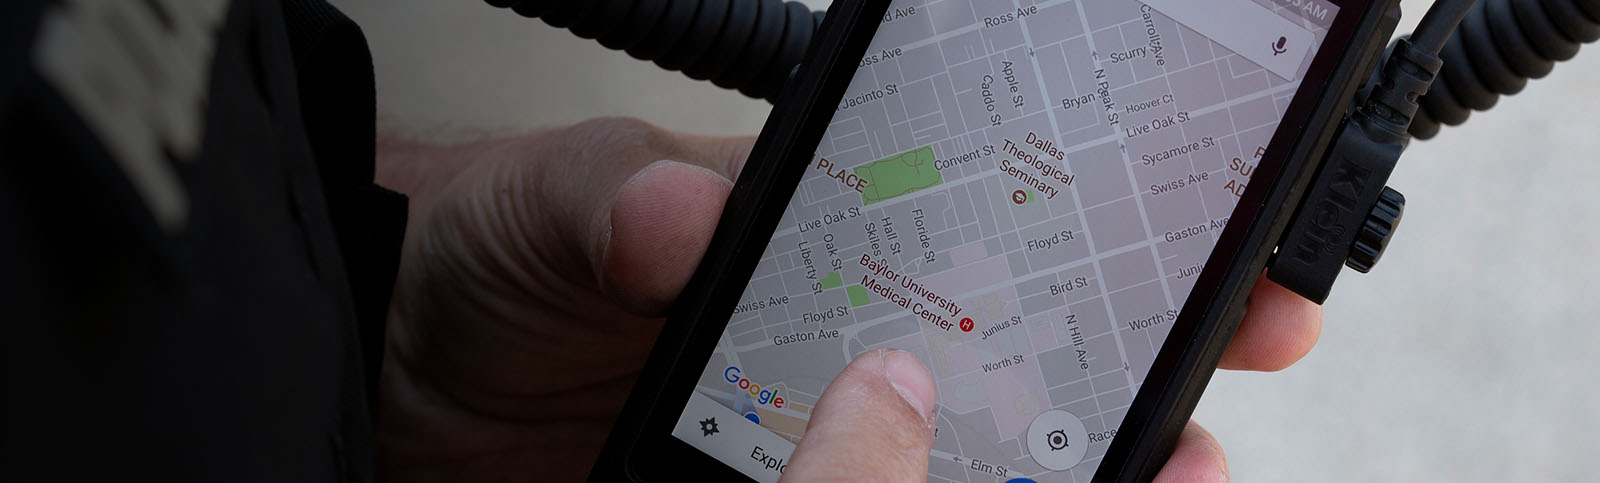 Hands holding a cell phone while reviewing “Baylor University Medical Center” on a map on the screen 